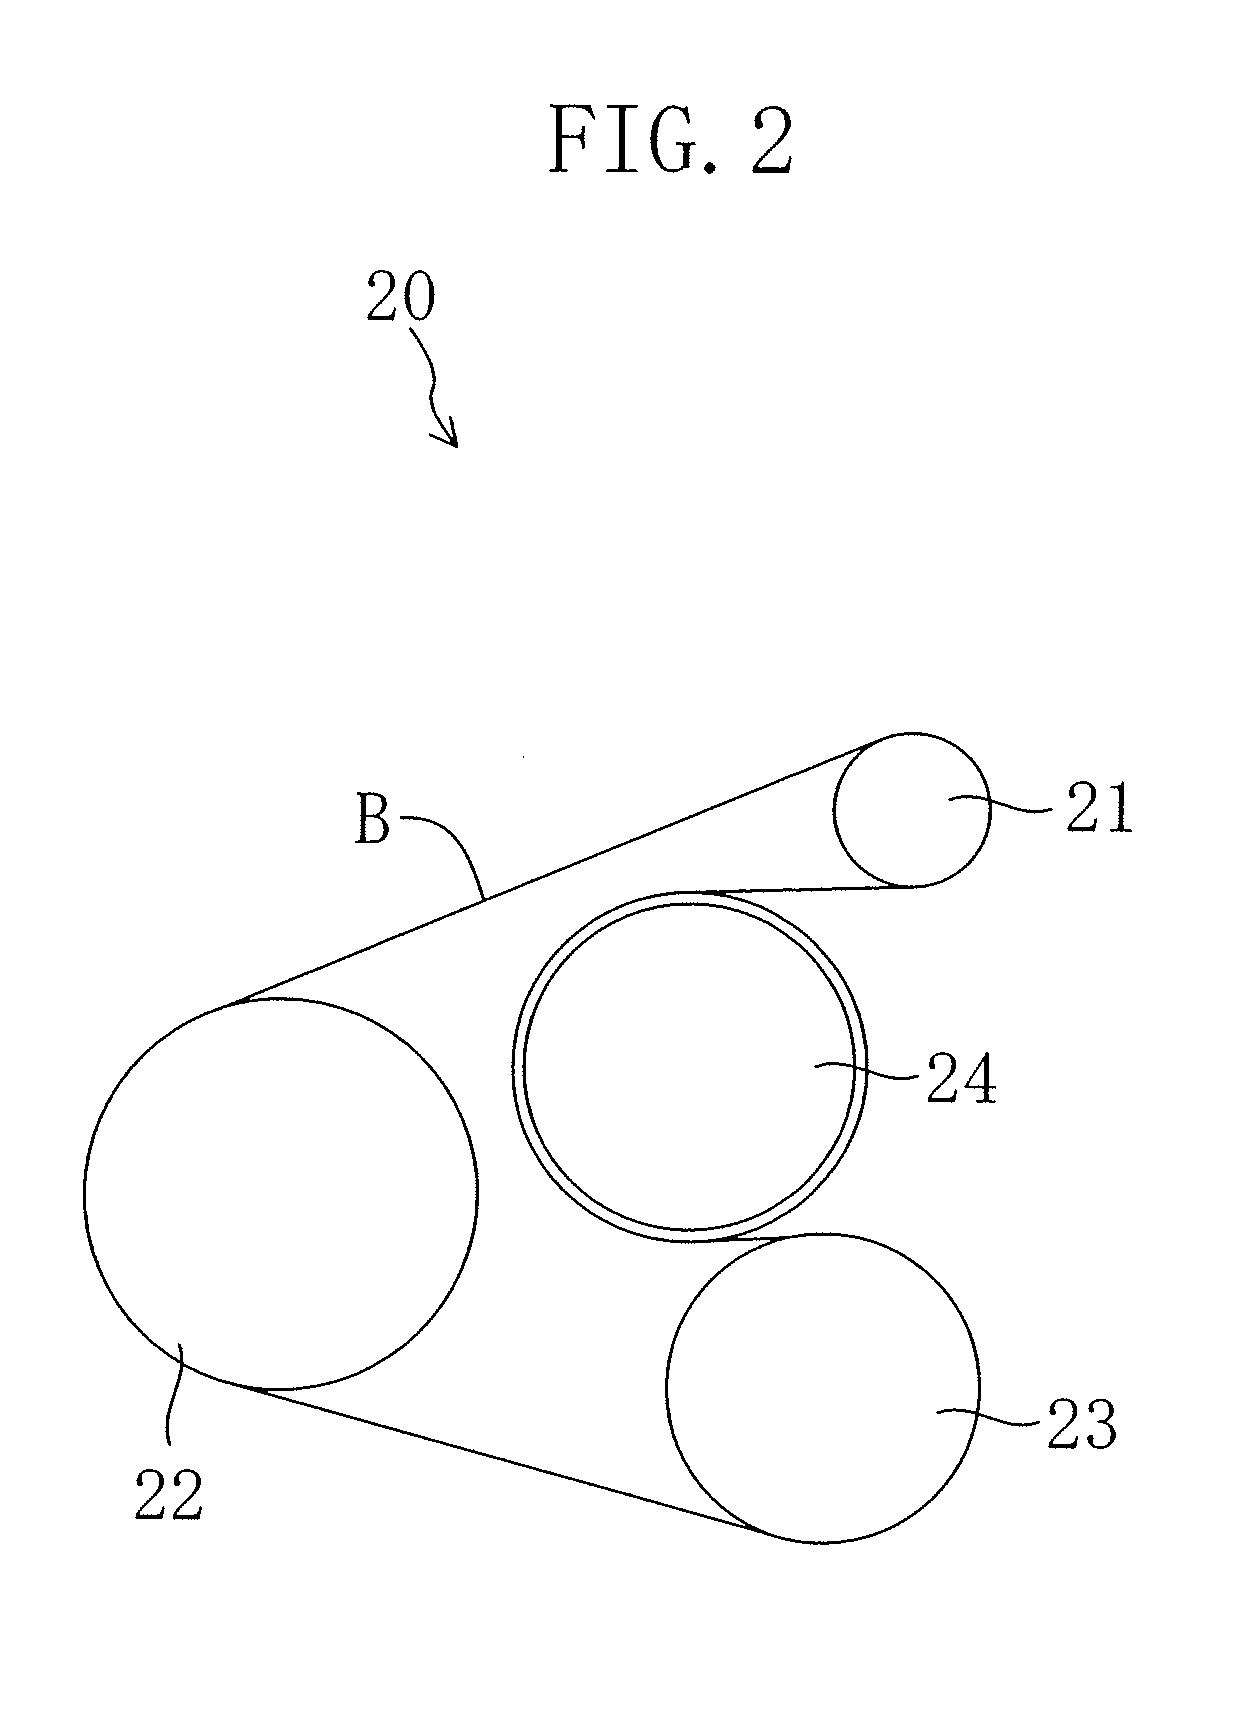 V-ribbed belt and automotive accessory drive belt drive system using the same